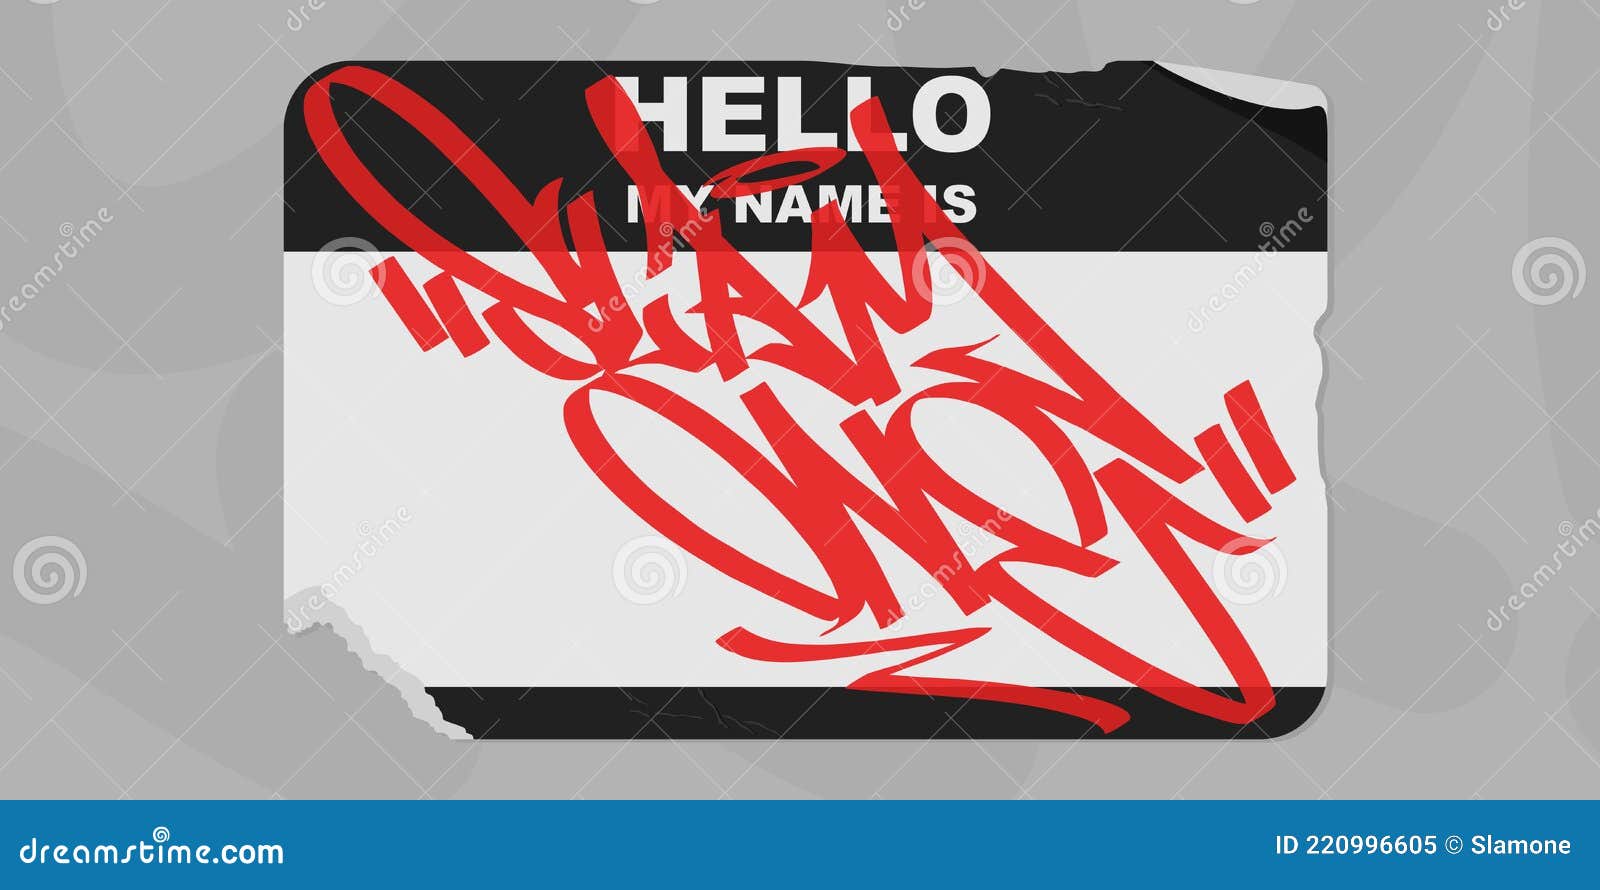 graffiti style outdoor sticker hello my name is with some street art urban lettering   art